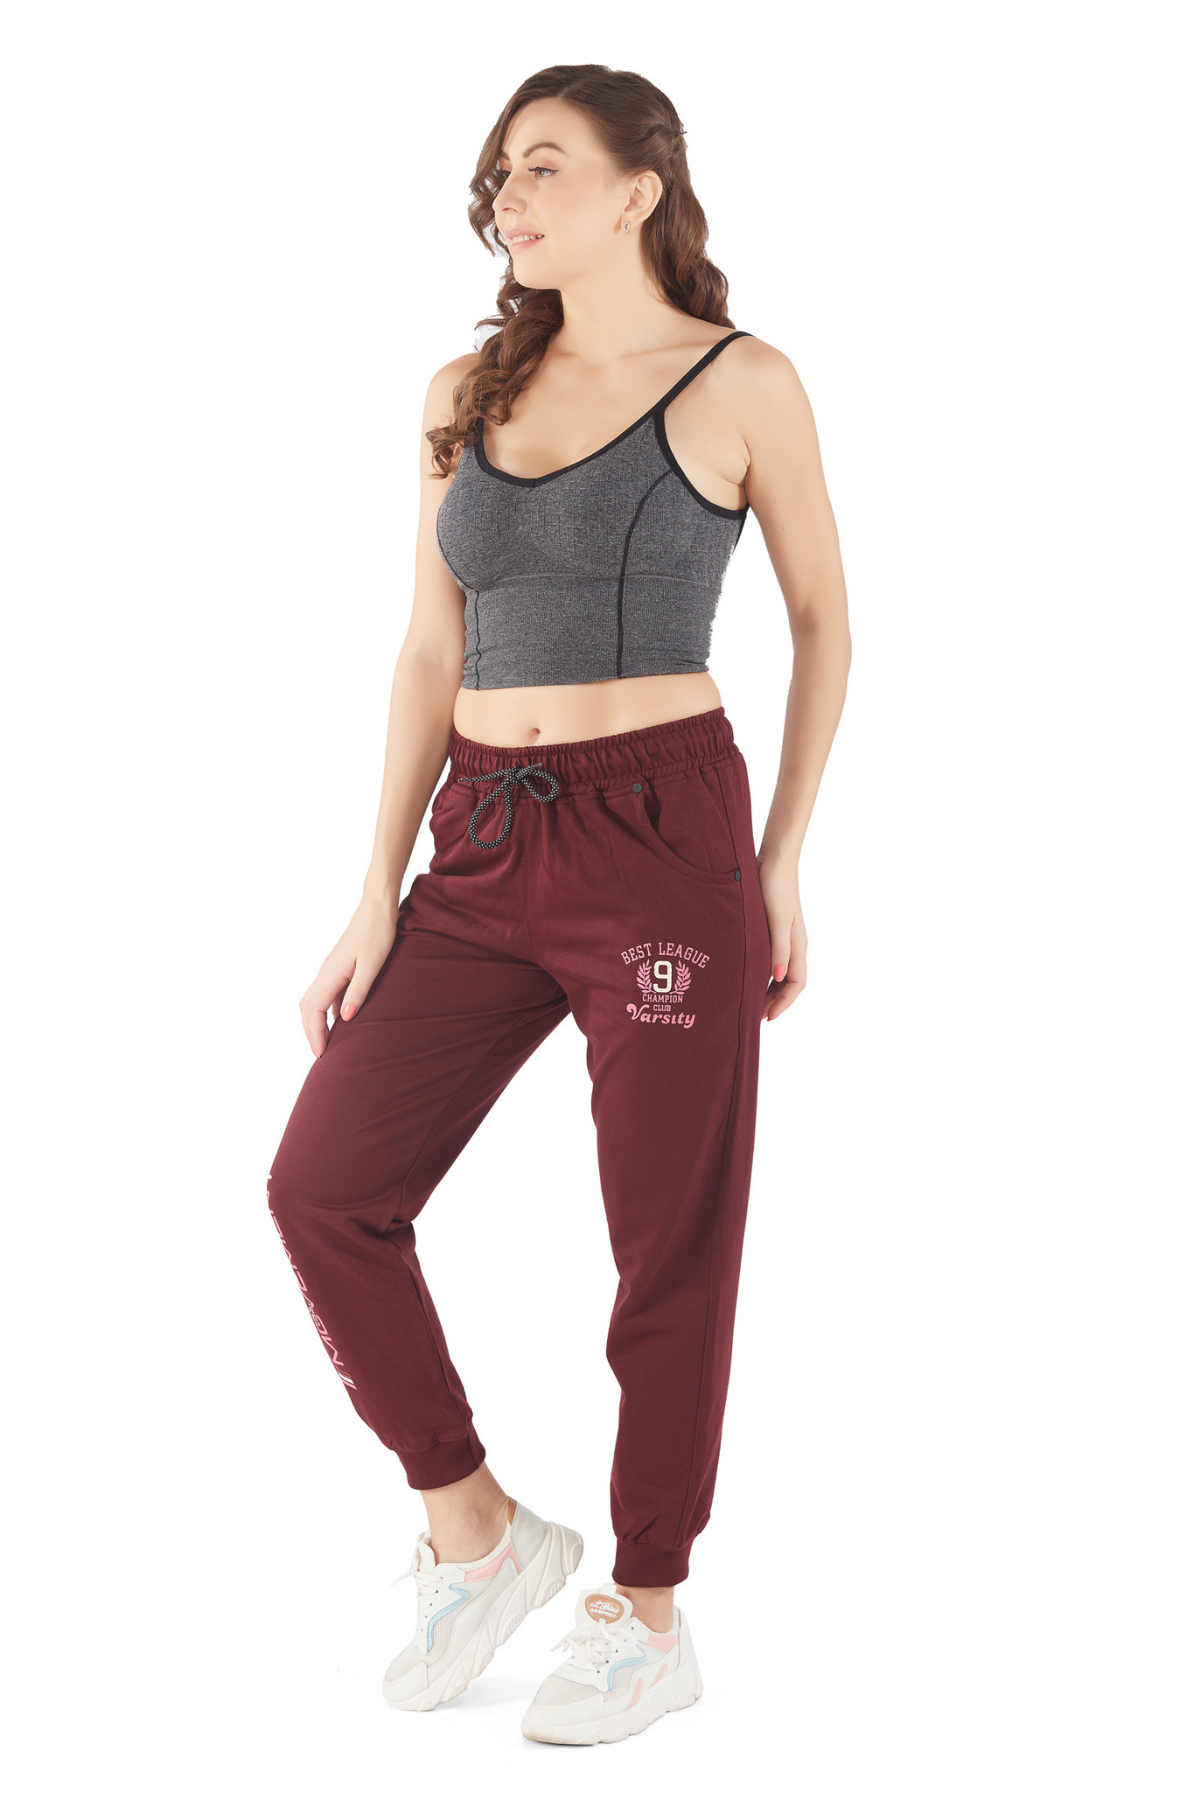 Joggers For Women - Buy Joggers For Women online at Best Prices in India